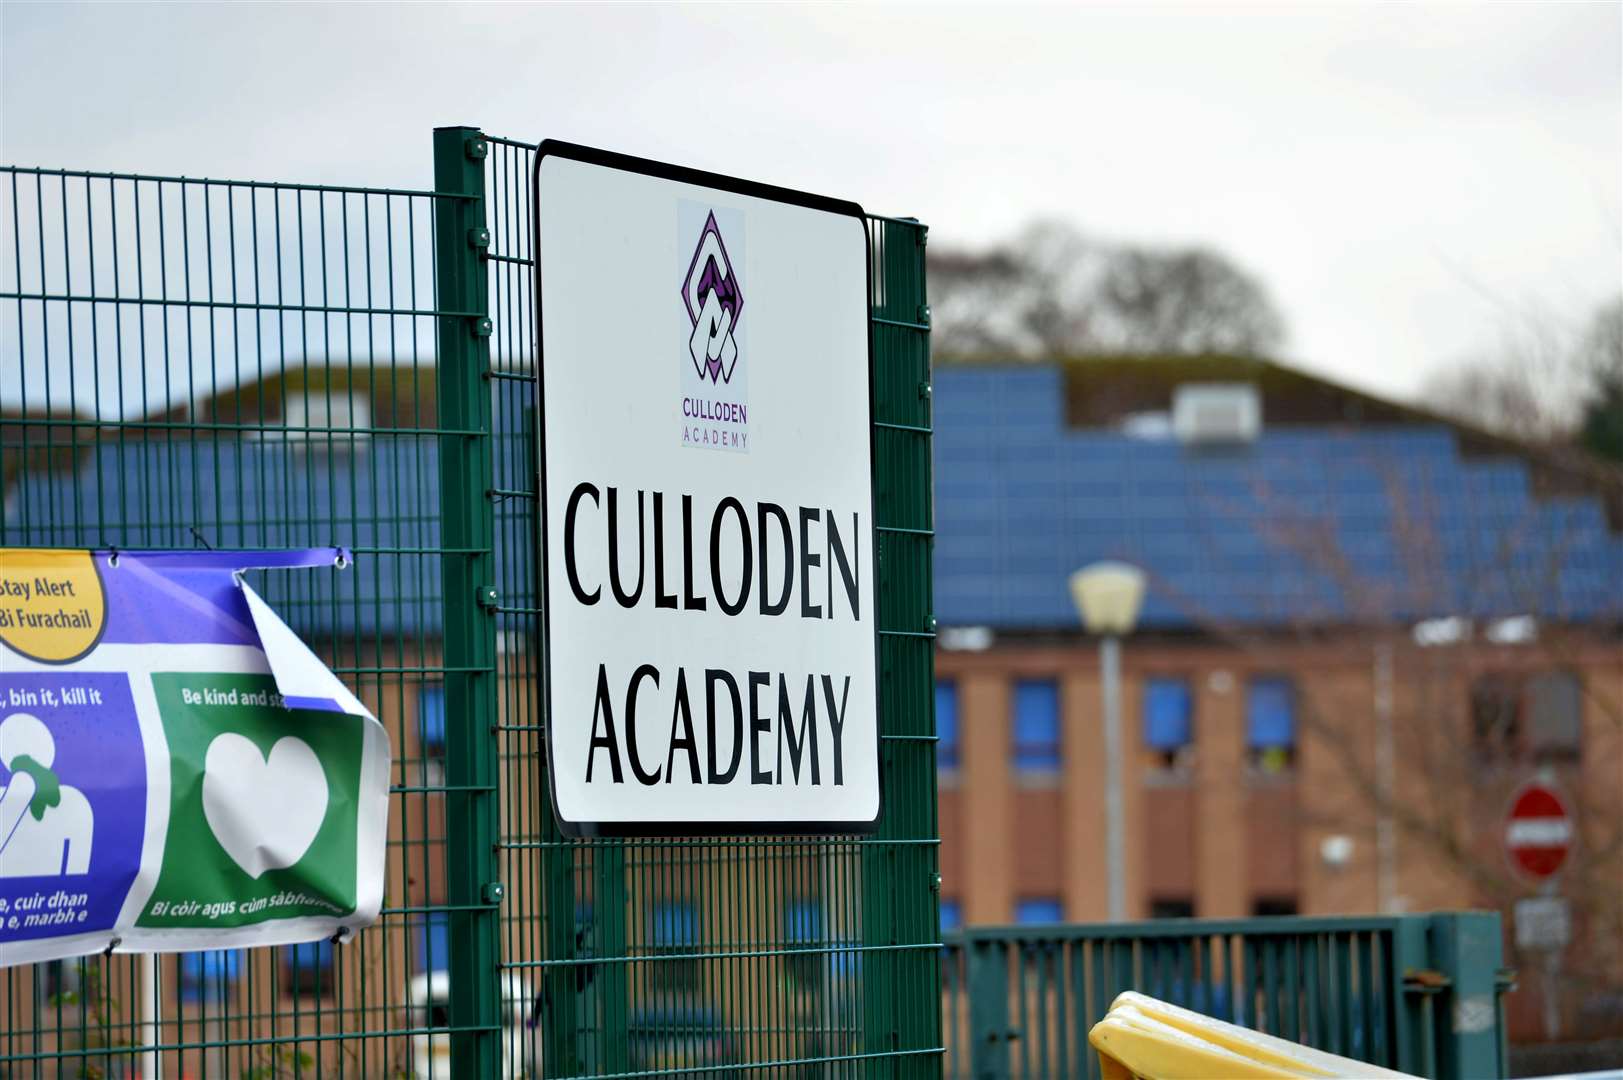 Culloden Academy has 1117 pupils according to the Highland Council website.